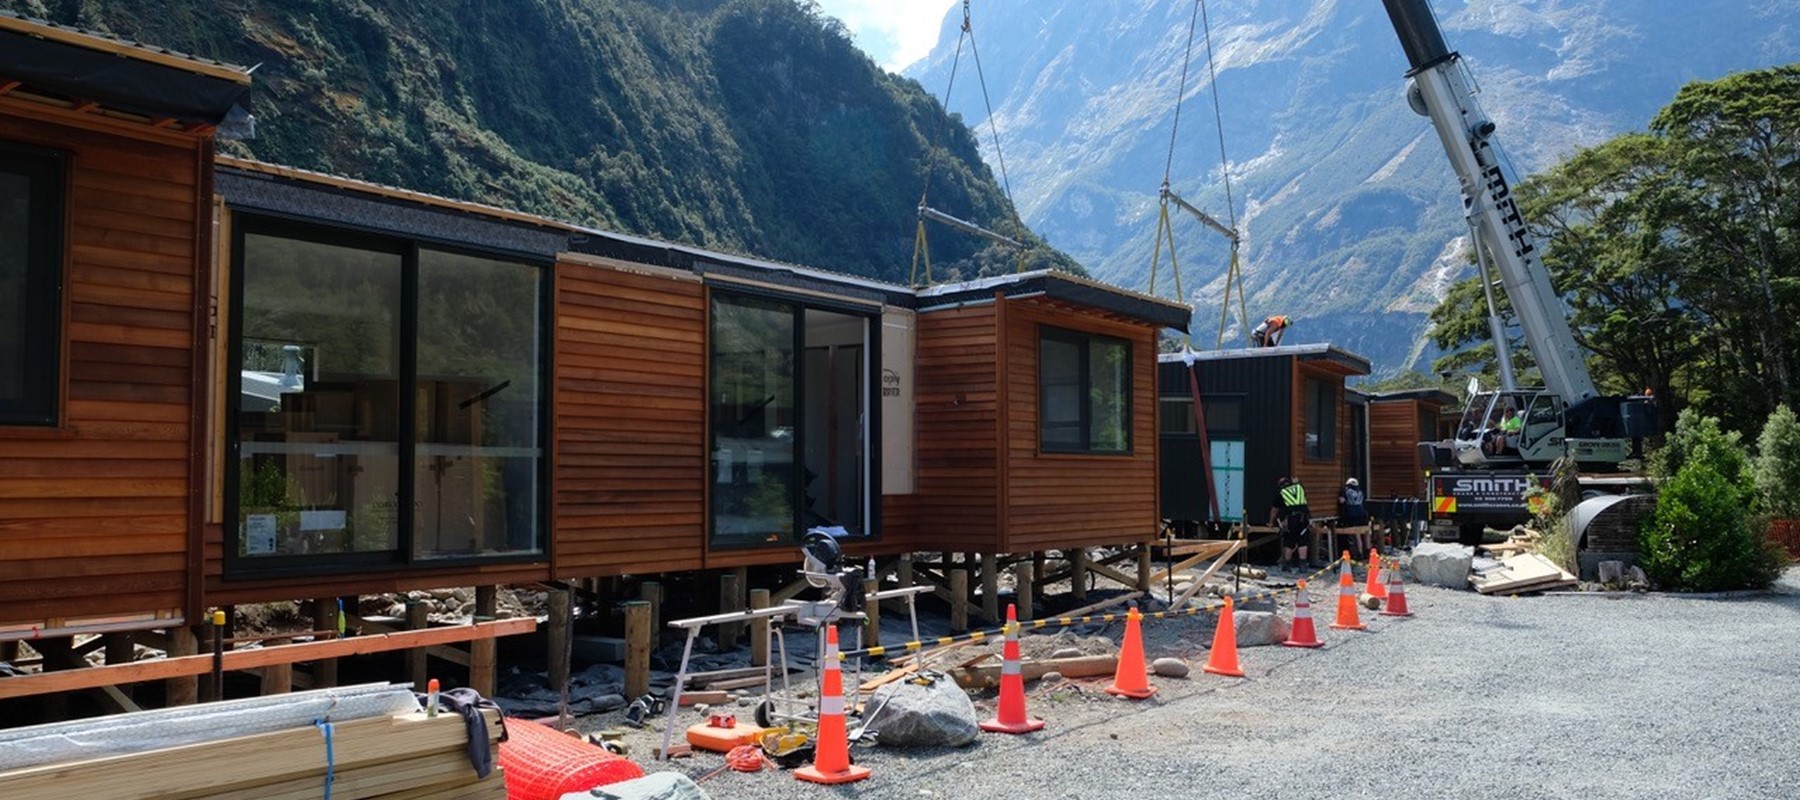 Moving the chalet accommodation to the Milford Sound Lodge in November 2018.